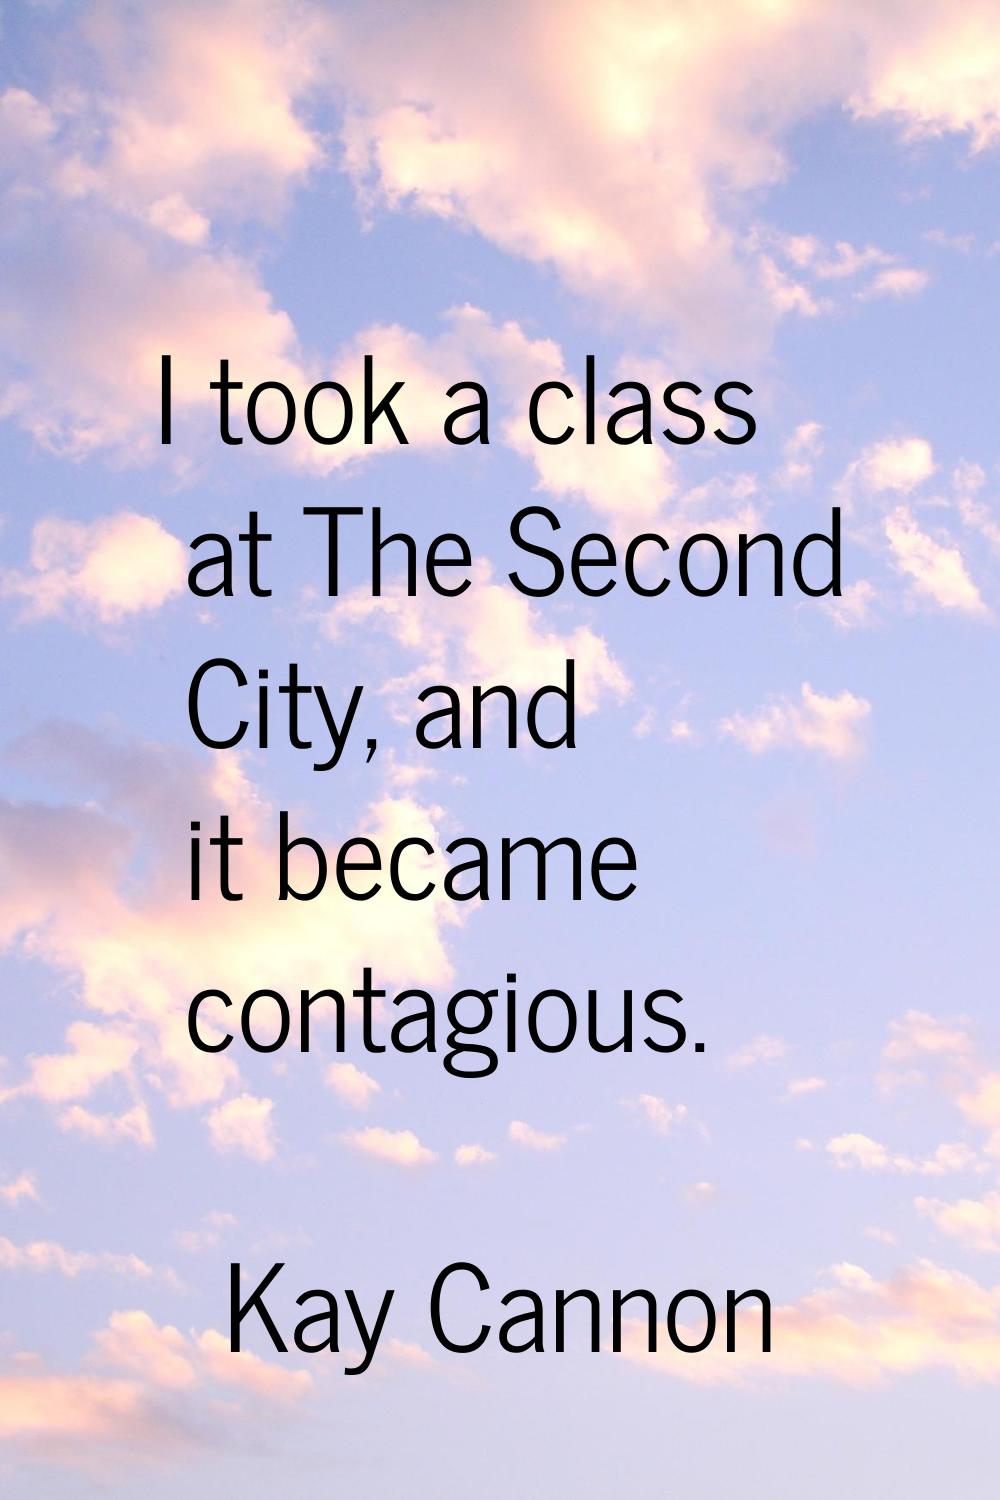 I took a class at The Second City, and it became contagious.